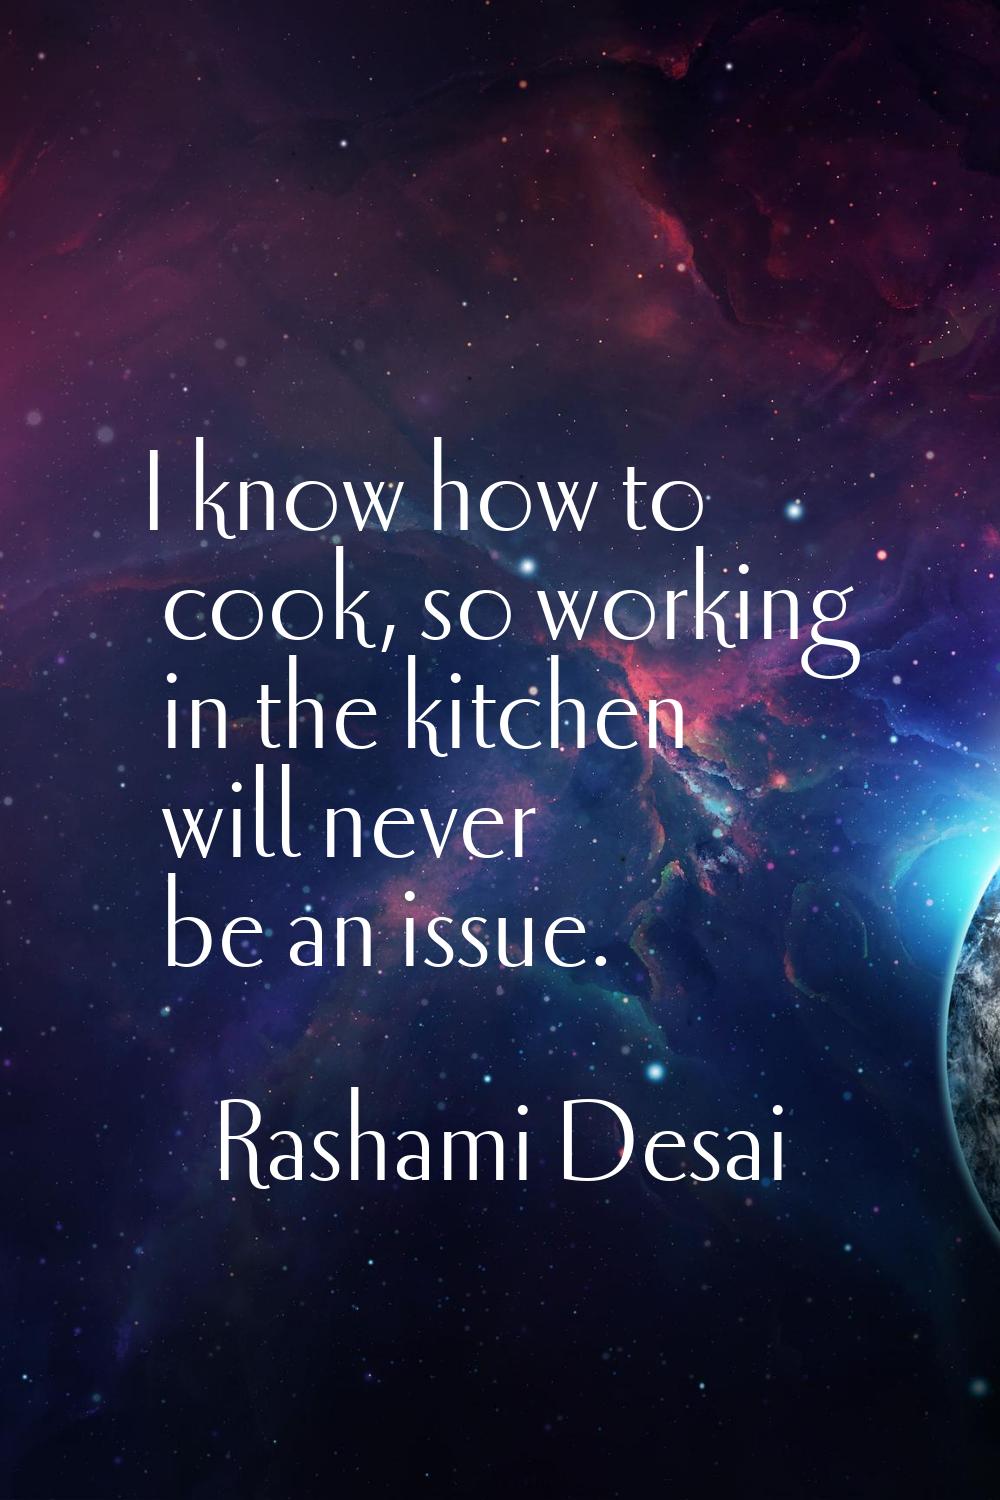 I know how to cook, so working in the kitchen will never be an issue.